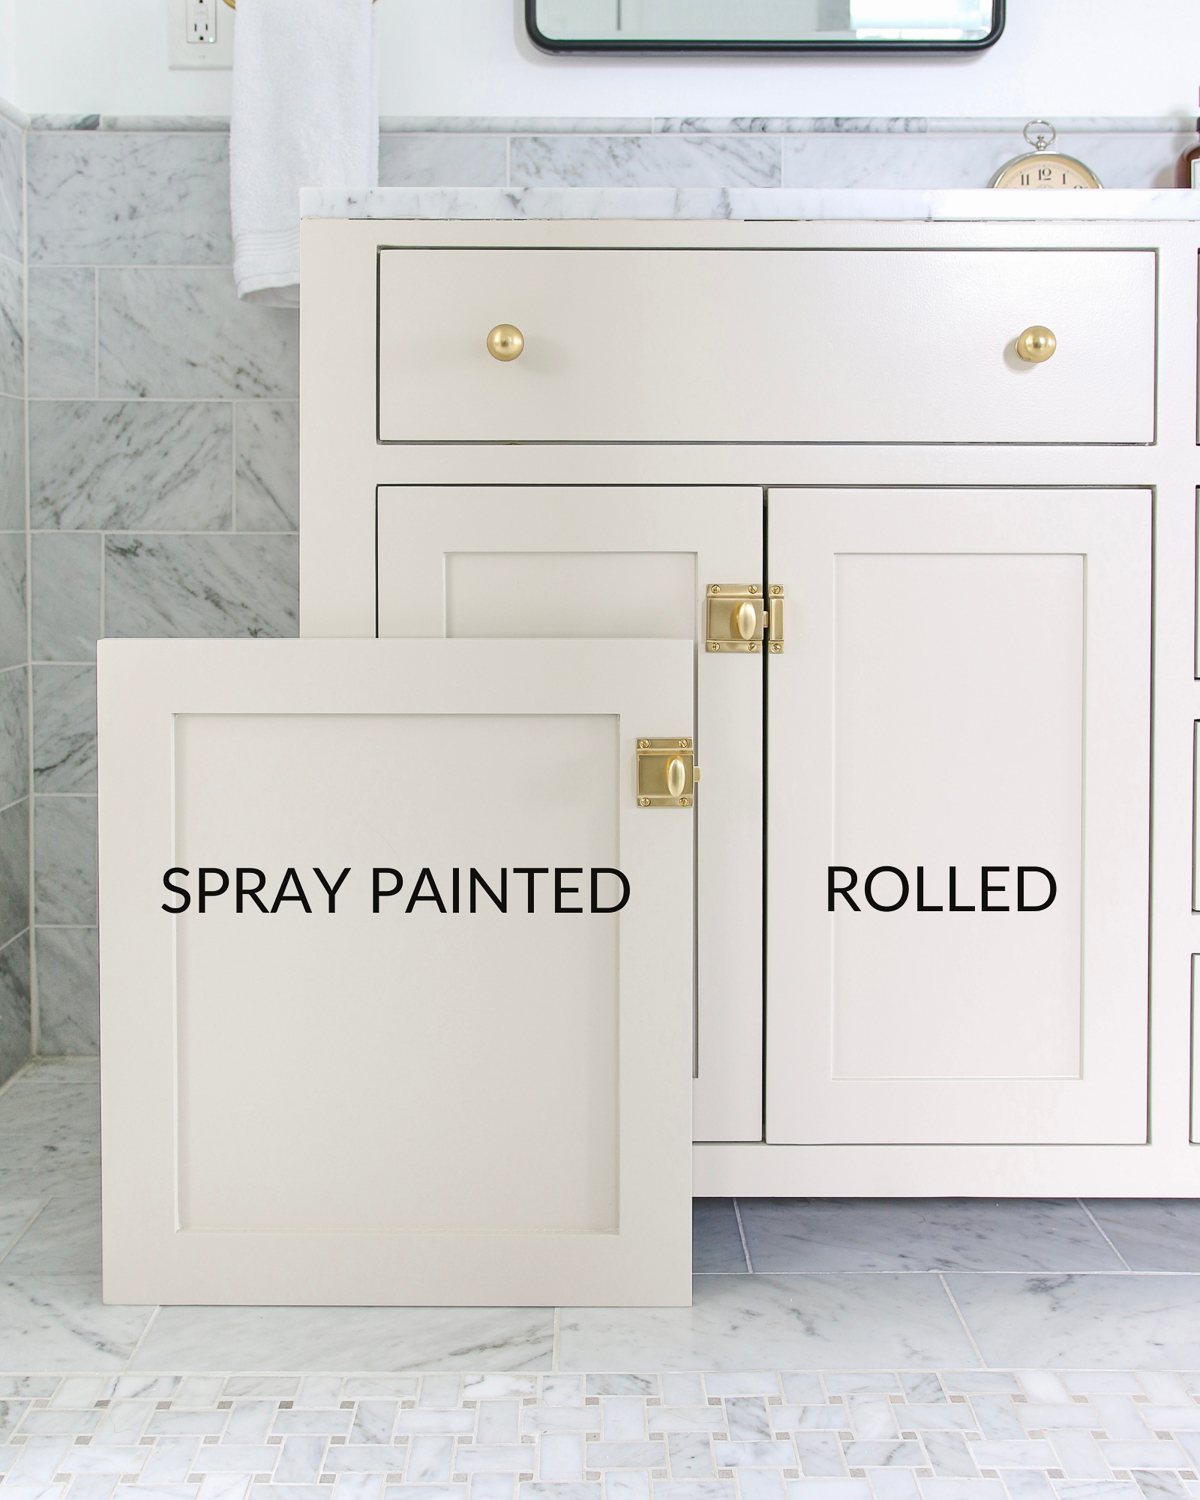 comparison of cabinet doors, spray painted vs rolled paint